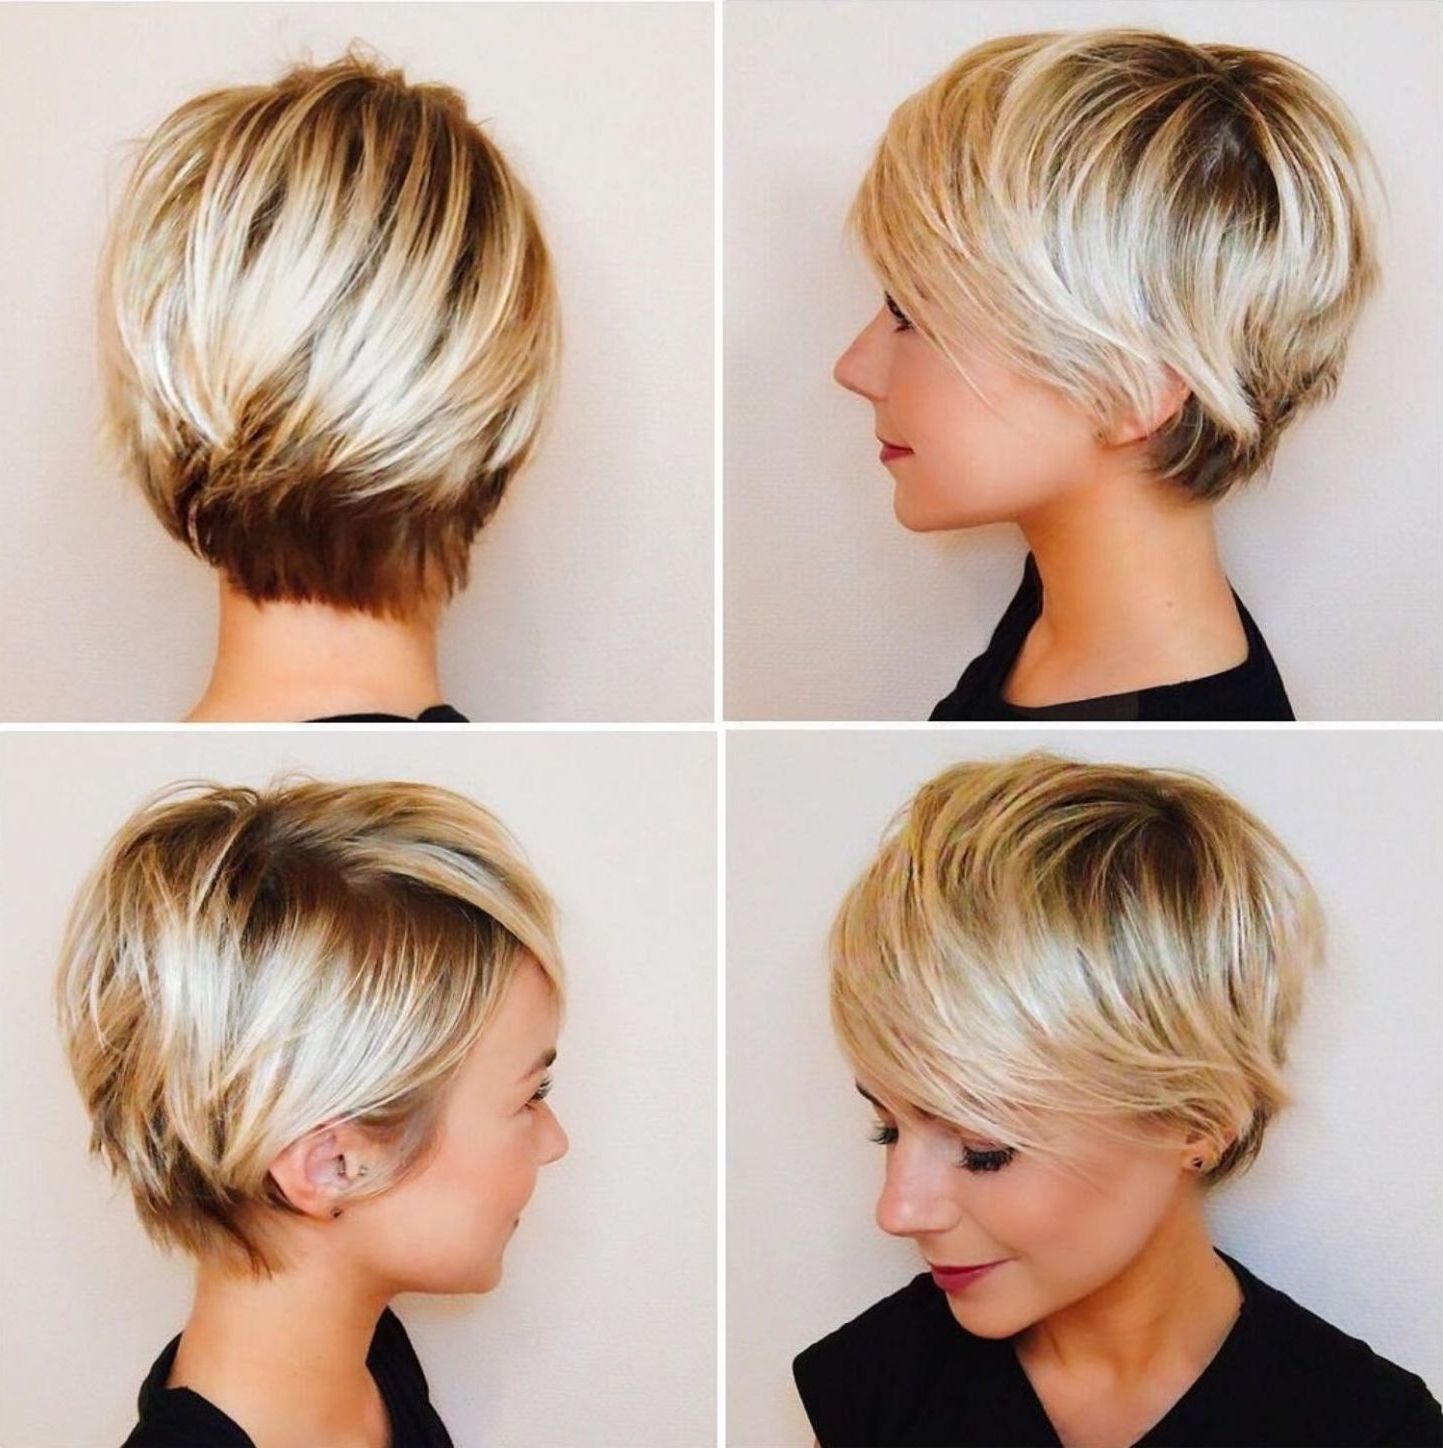 Pin On Fun Hair Styles Within Shaggy Pixie Haircuts With Bangs (View 3 of 20)